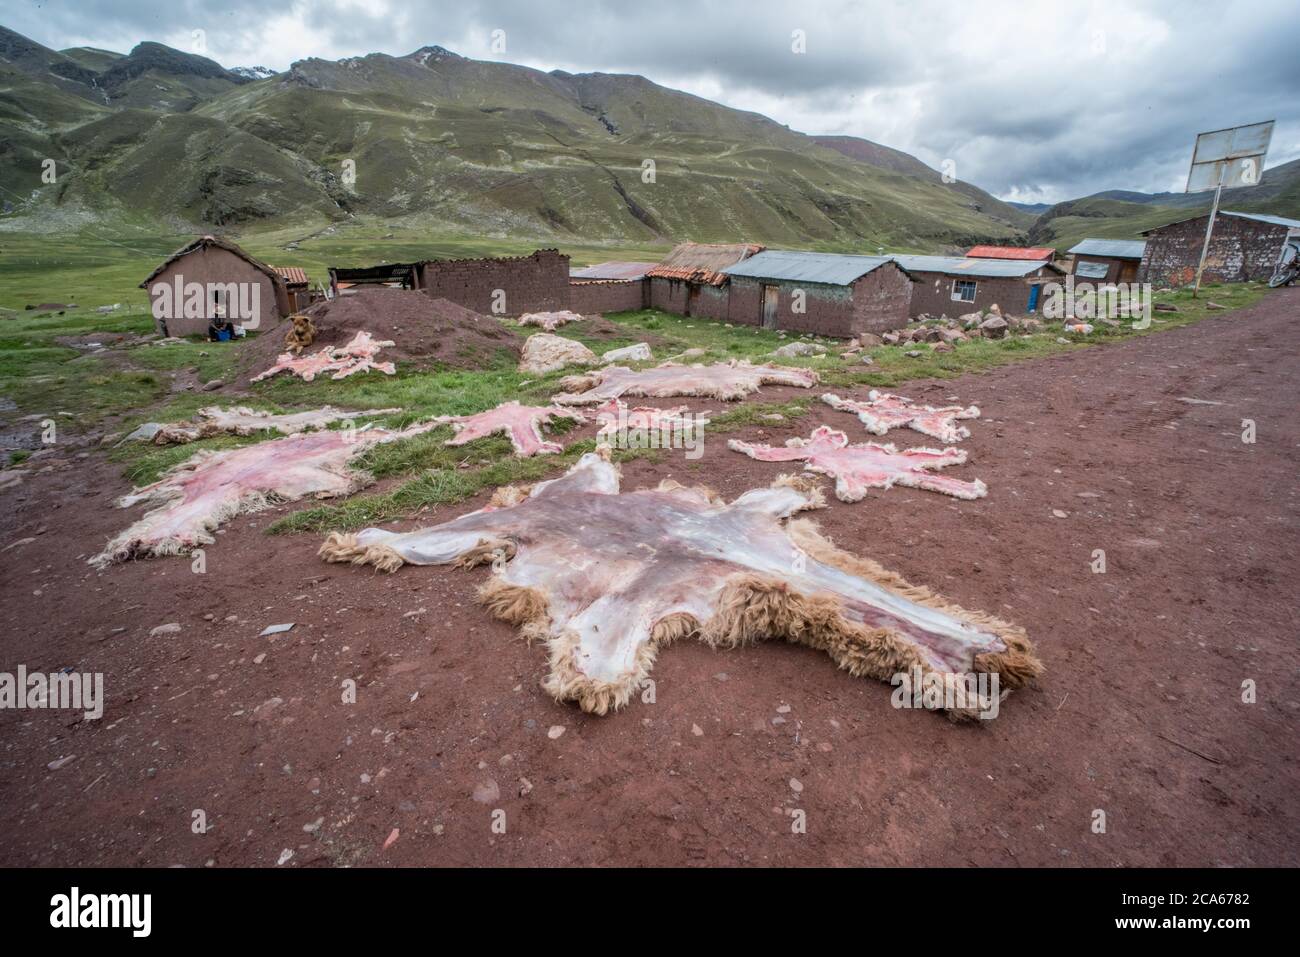 Alpaca and llama skins laid out to dry in the road in a small Andean village in Peru. Stock Photo